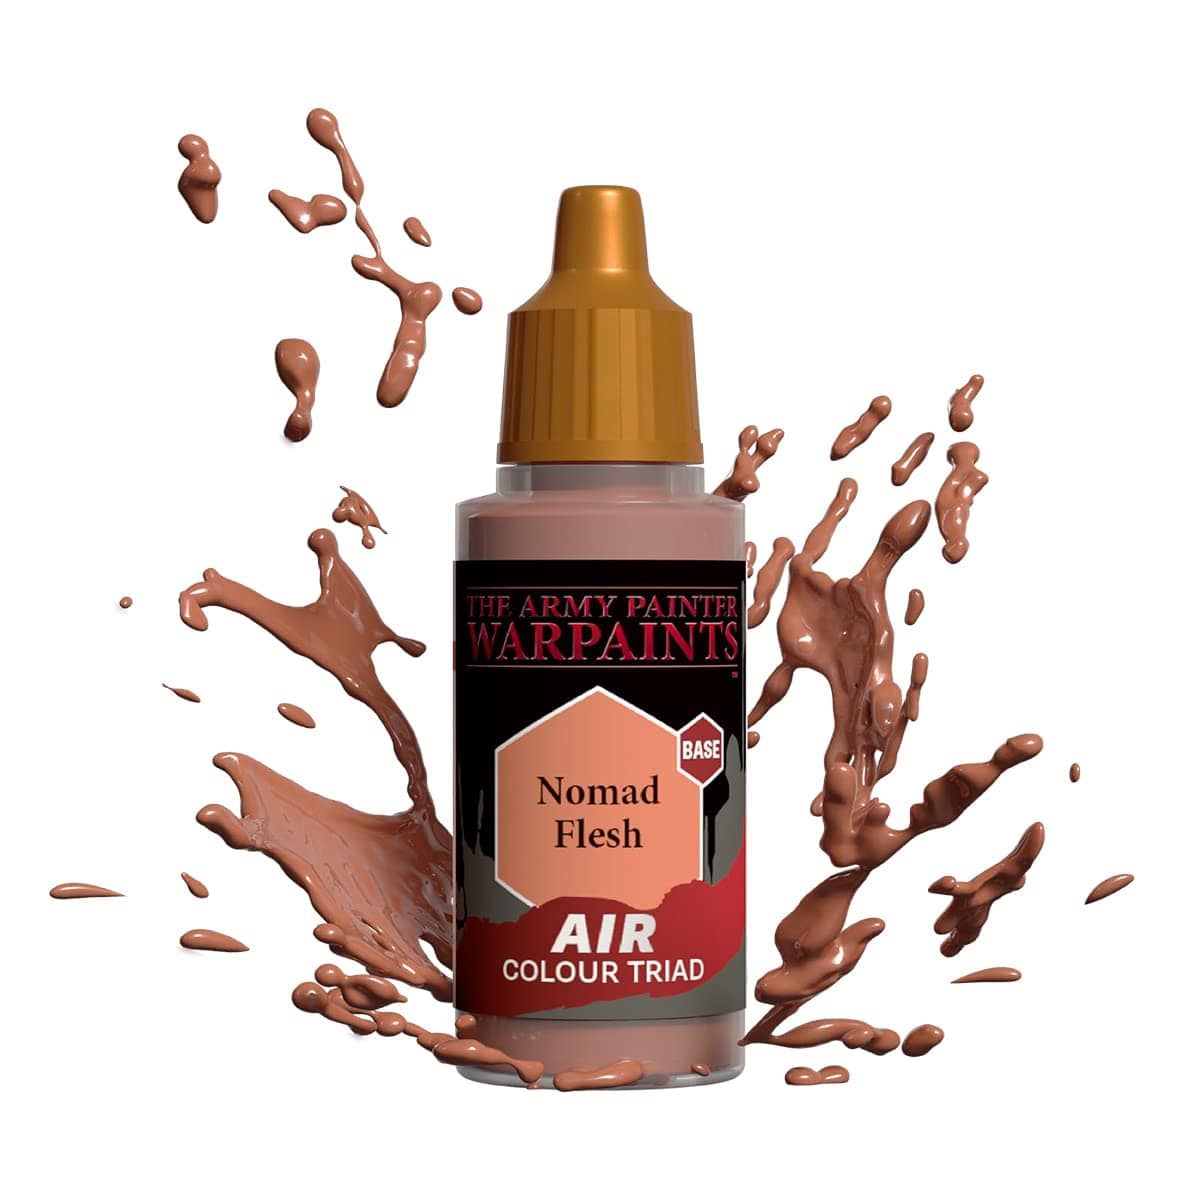 The Army Painter Accessories The Army Painter Warpaints Air: Nomad Flesh 18ml